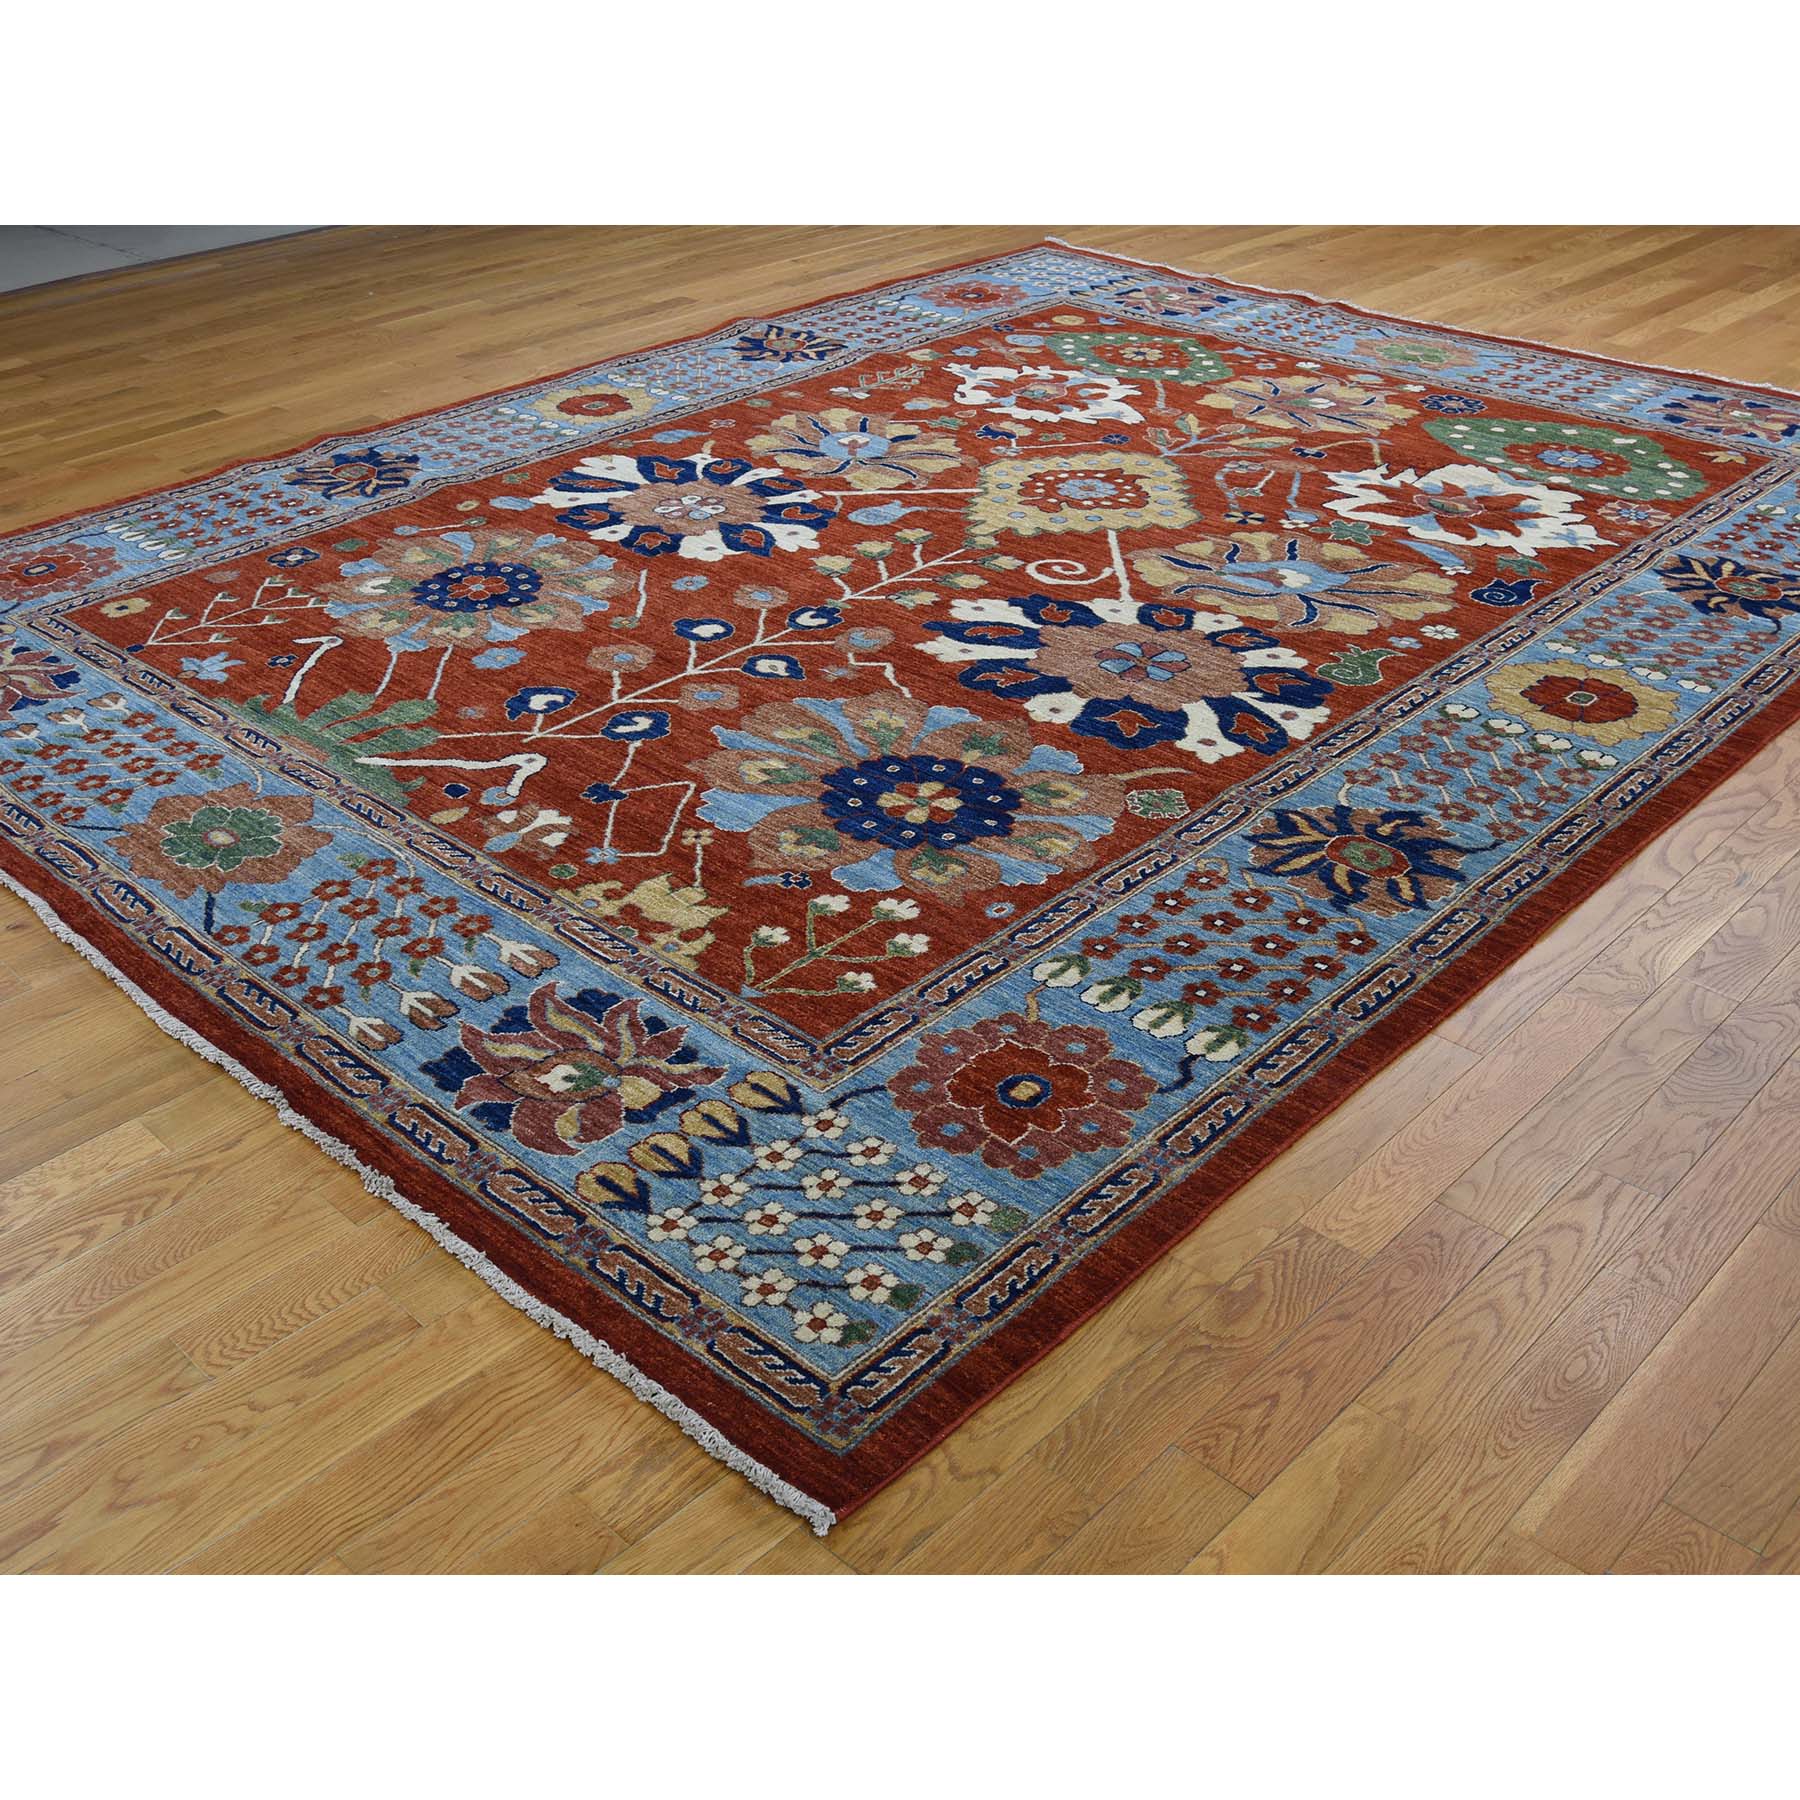 9-4 x 11-9- Hand-Knotted Peshawar Mahal Design With Wide Border Oriental Rug 